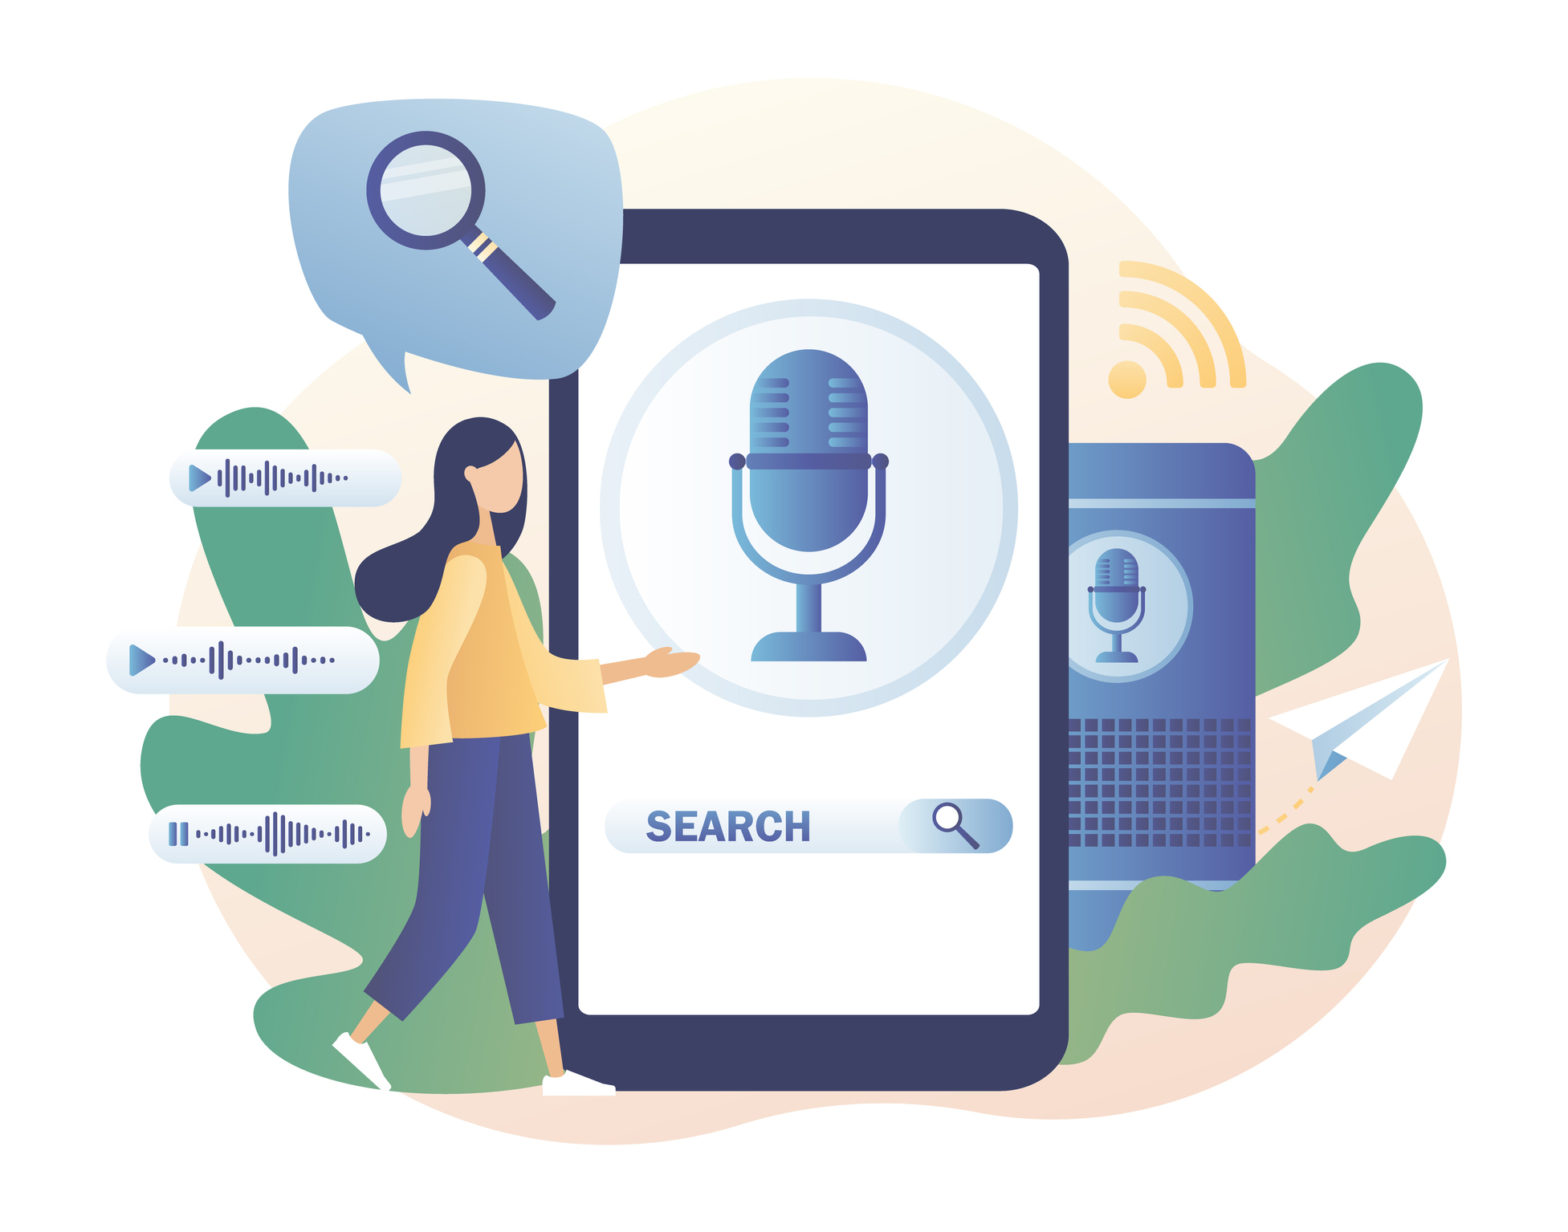 Voice assistant concept. Tiny woman use voice controlled, search, activated digital assistants, voice identification in smartphone app. Modern flat cartoon style. Vector illustration